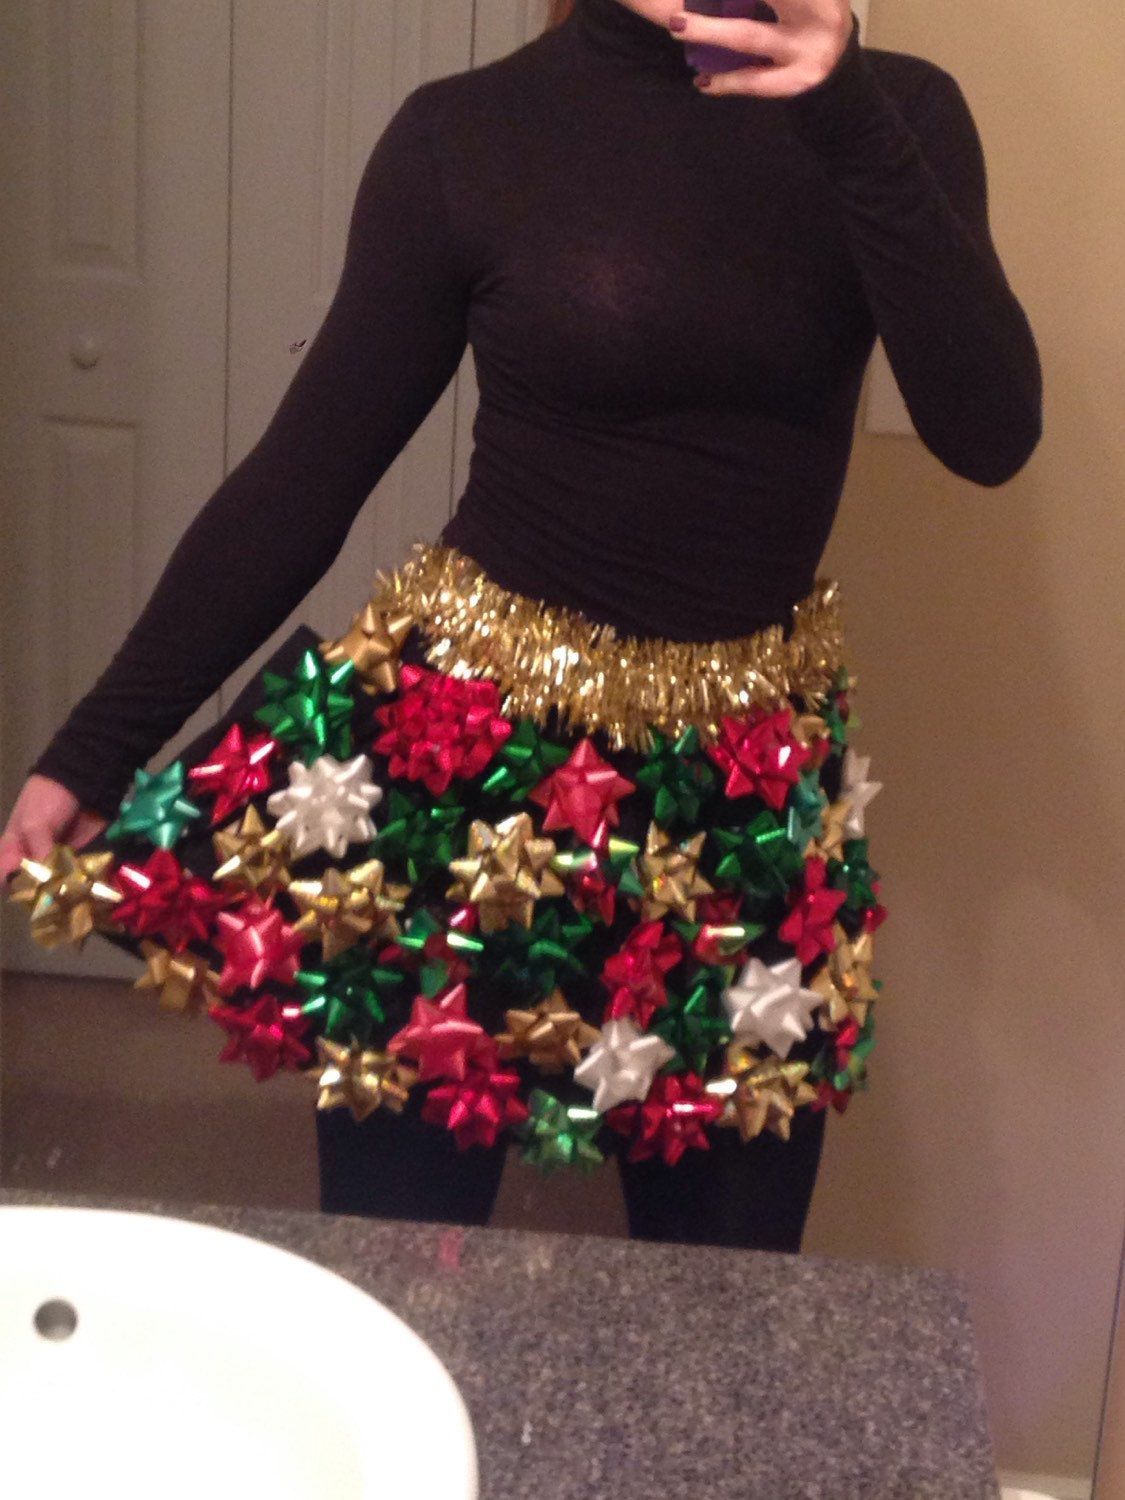 Ugly Christmas Skirt with Bows – Ugly Christmas Sweater Party by StaticThreads1 on Easy #uglychristmassweater